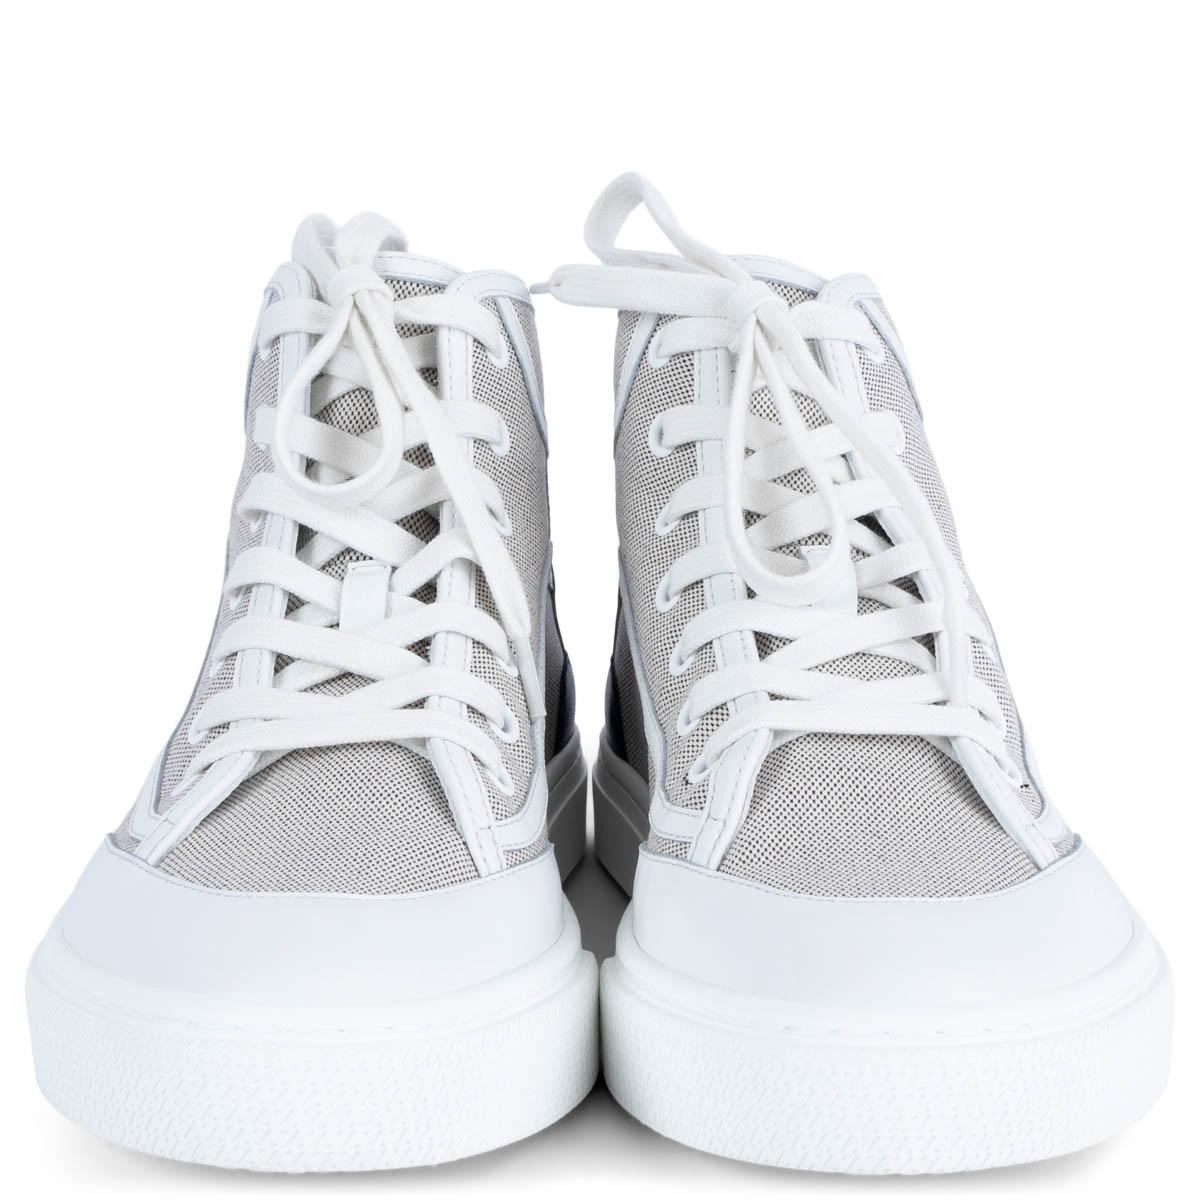 100% authentic HHermès Get Up high-top sneakers in black and white H canvas. Feature signature 